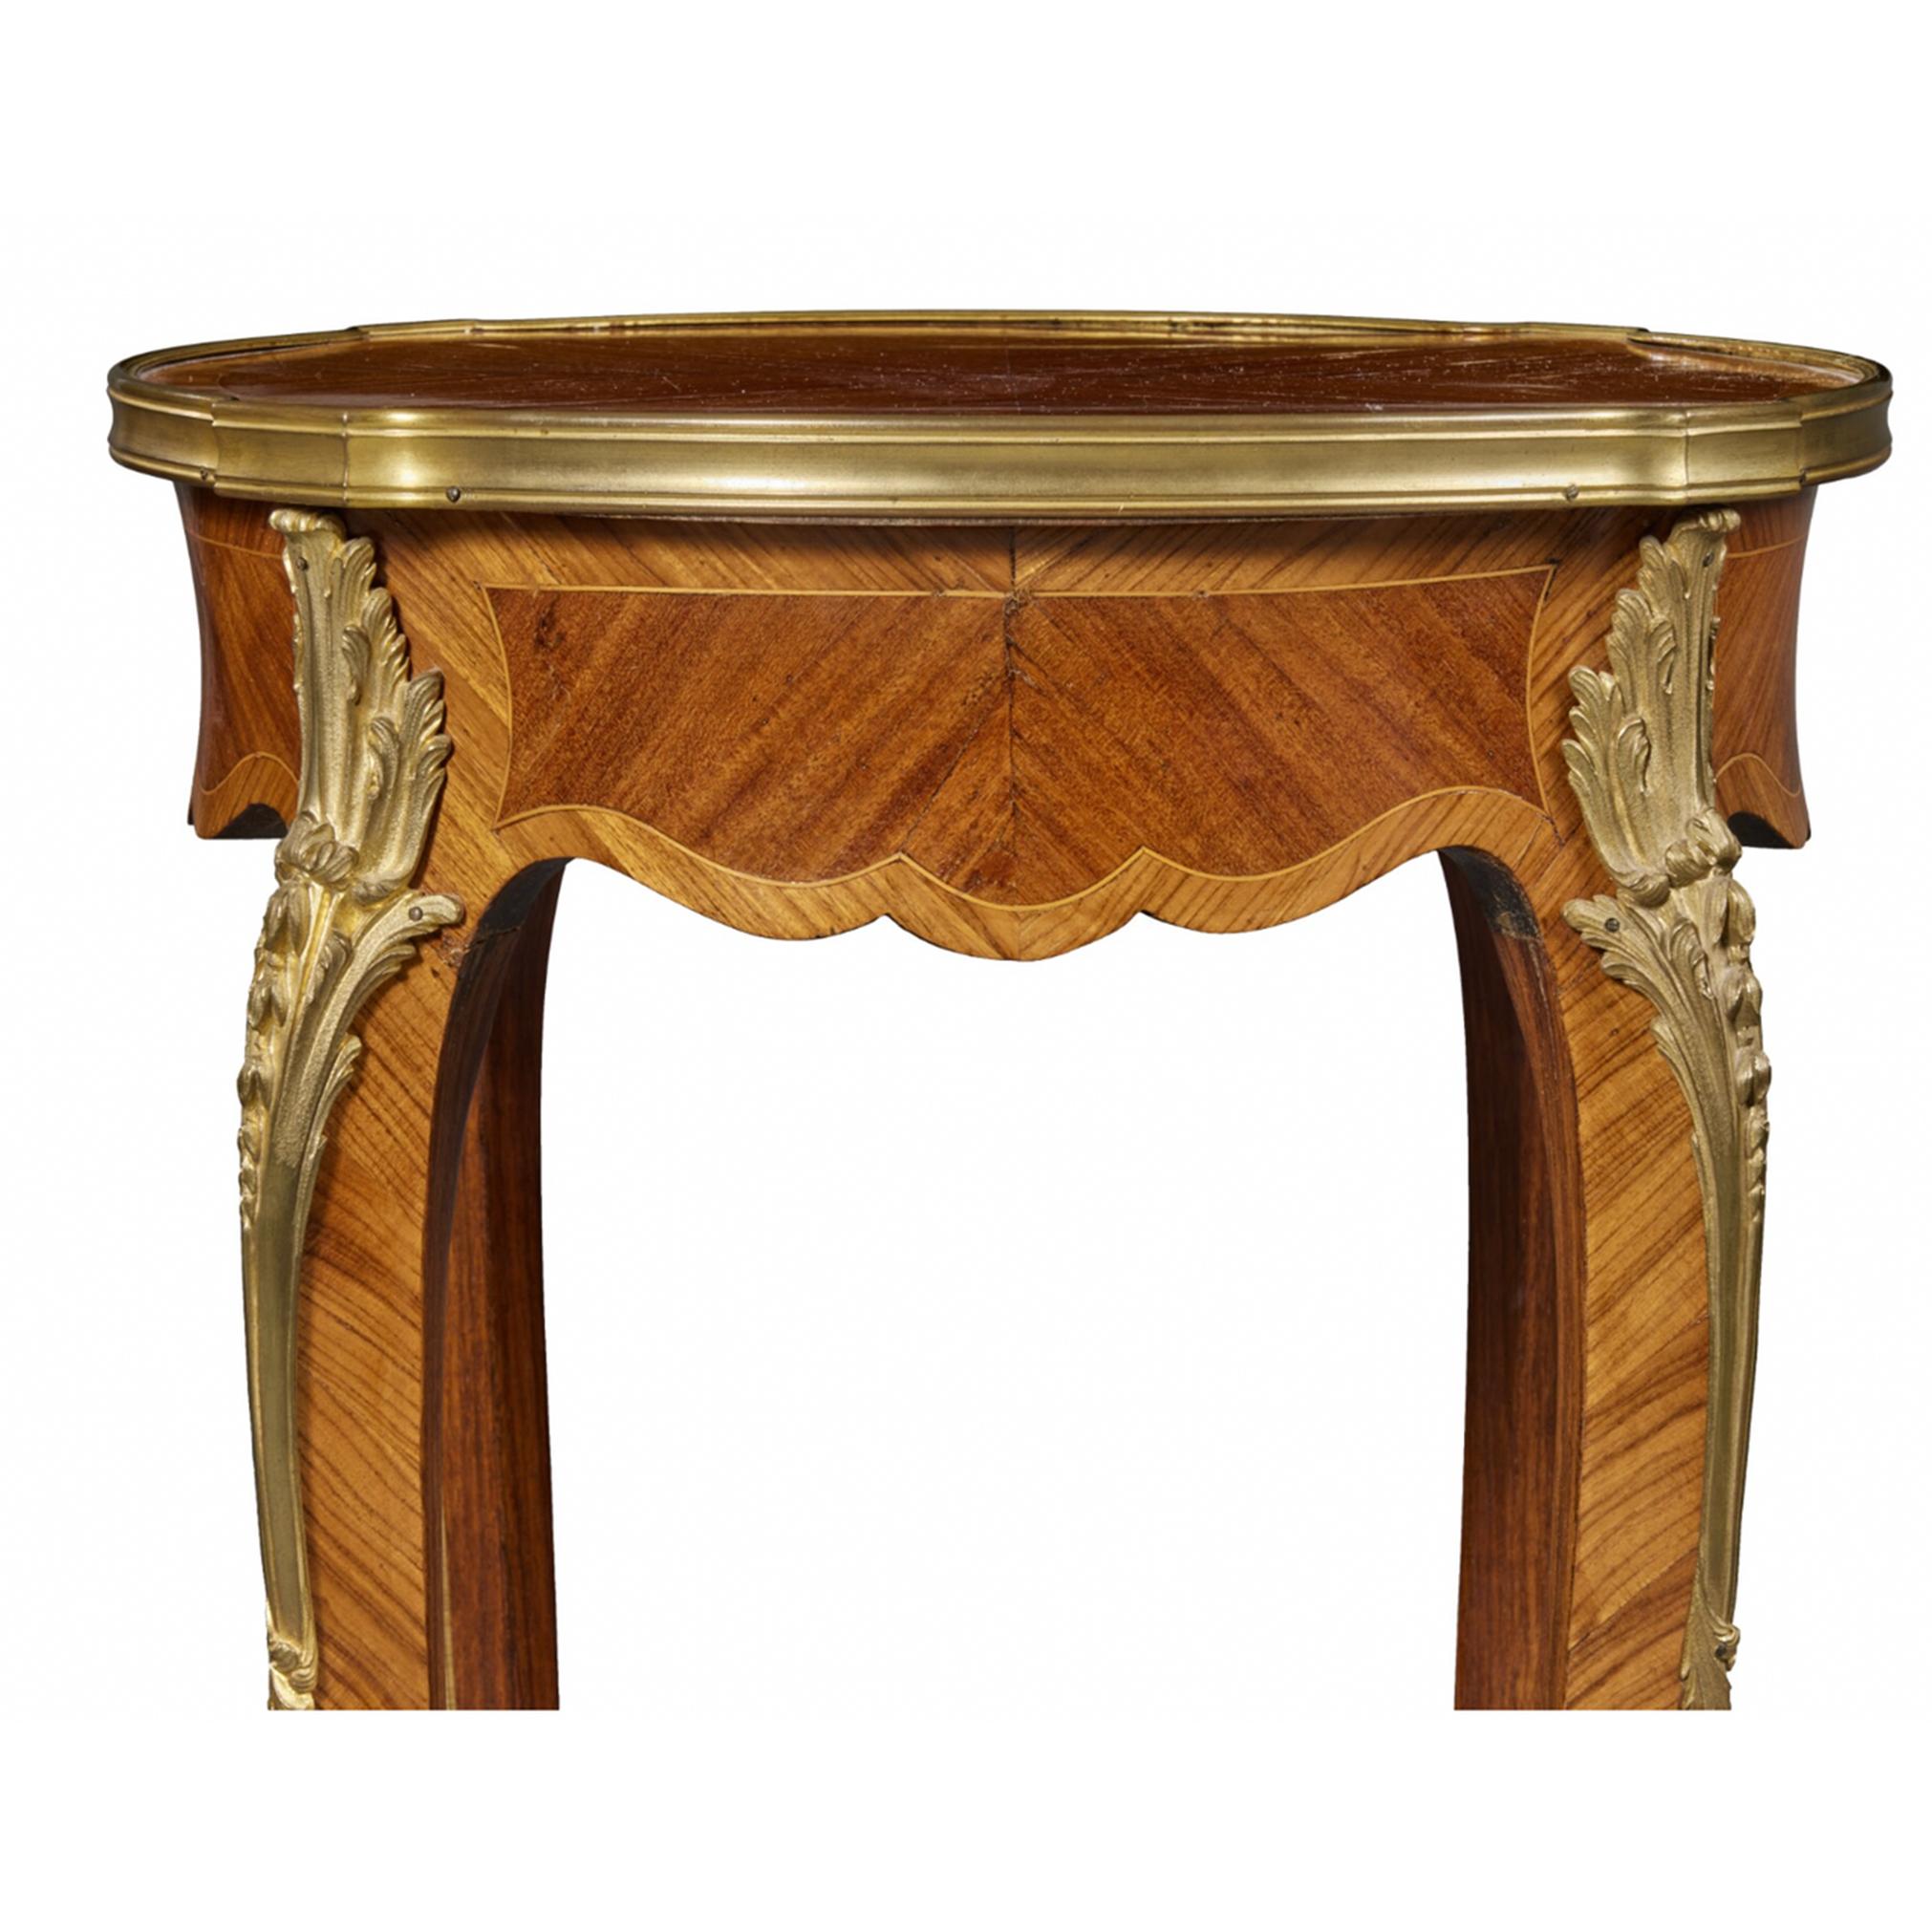 French Louis XV Style Gilt-Bronze Mounted Bois Satiné and Kingwood Side Table For Sale